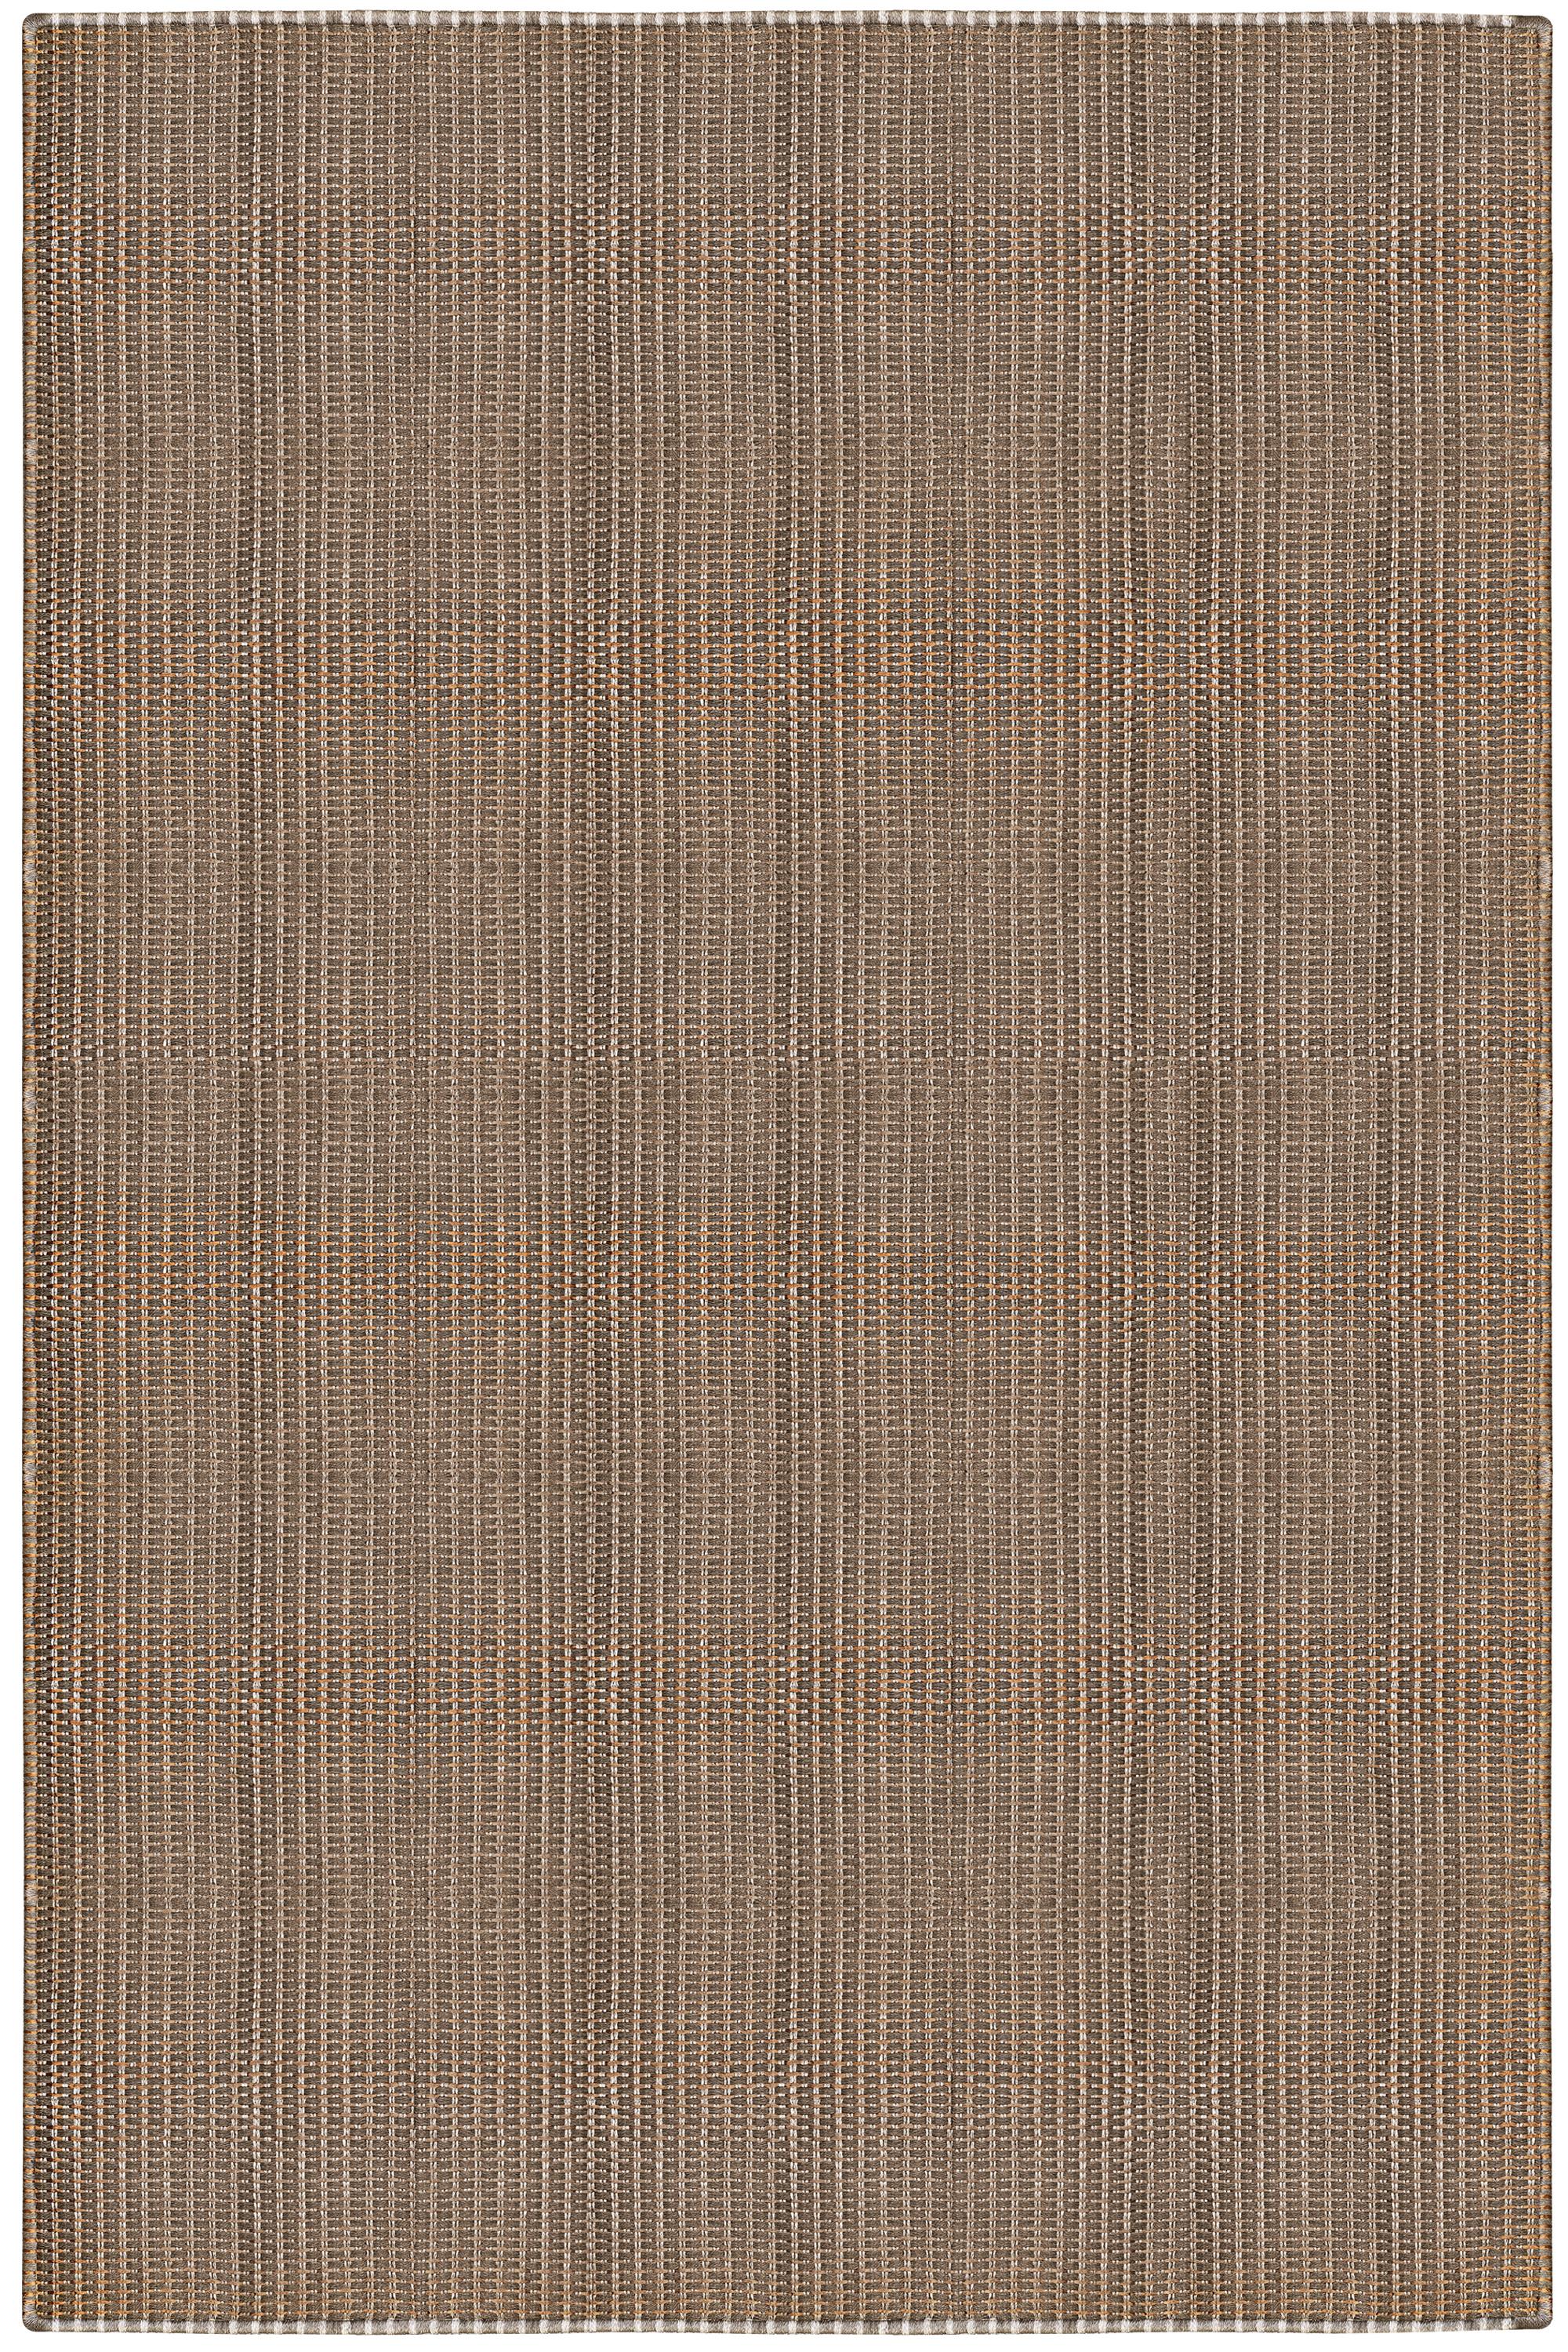 Colombian Umber / Natural Fiber and Copper Handcrafted Area Rug 3'11